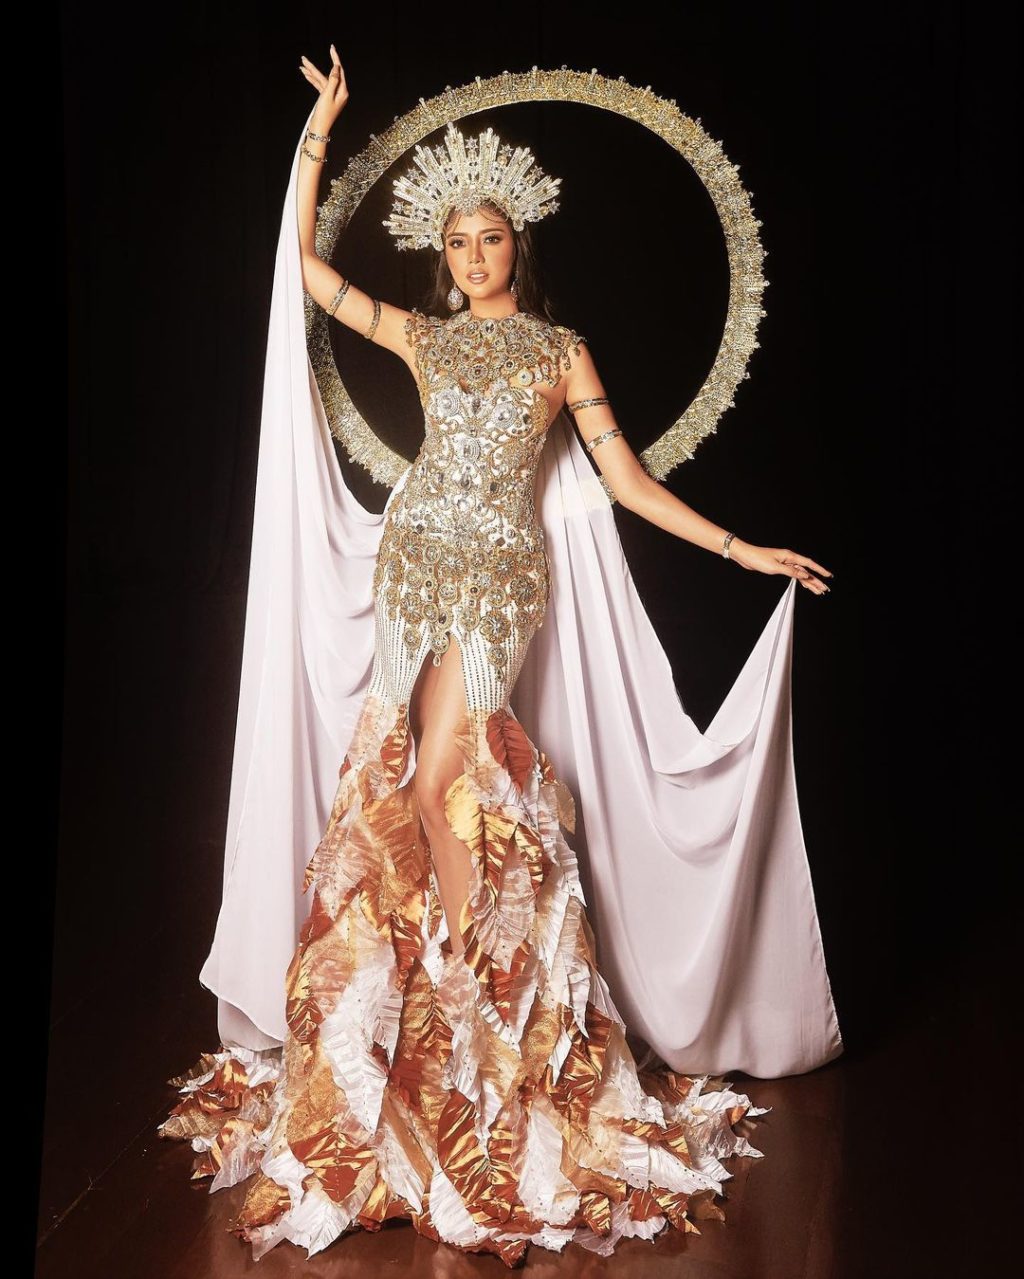 Cinderella Obeñita channels inner goddess in the national costume part of the Miss Intercontinental 2021 held in Egypt.